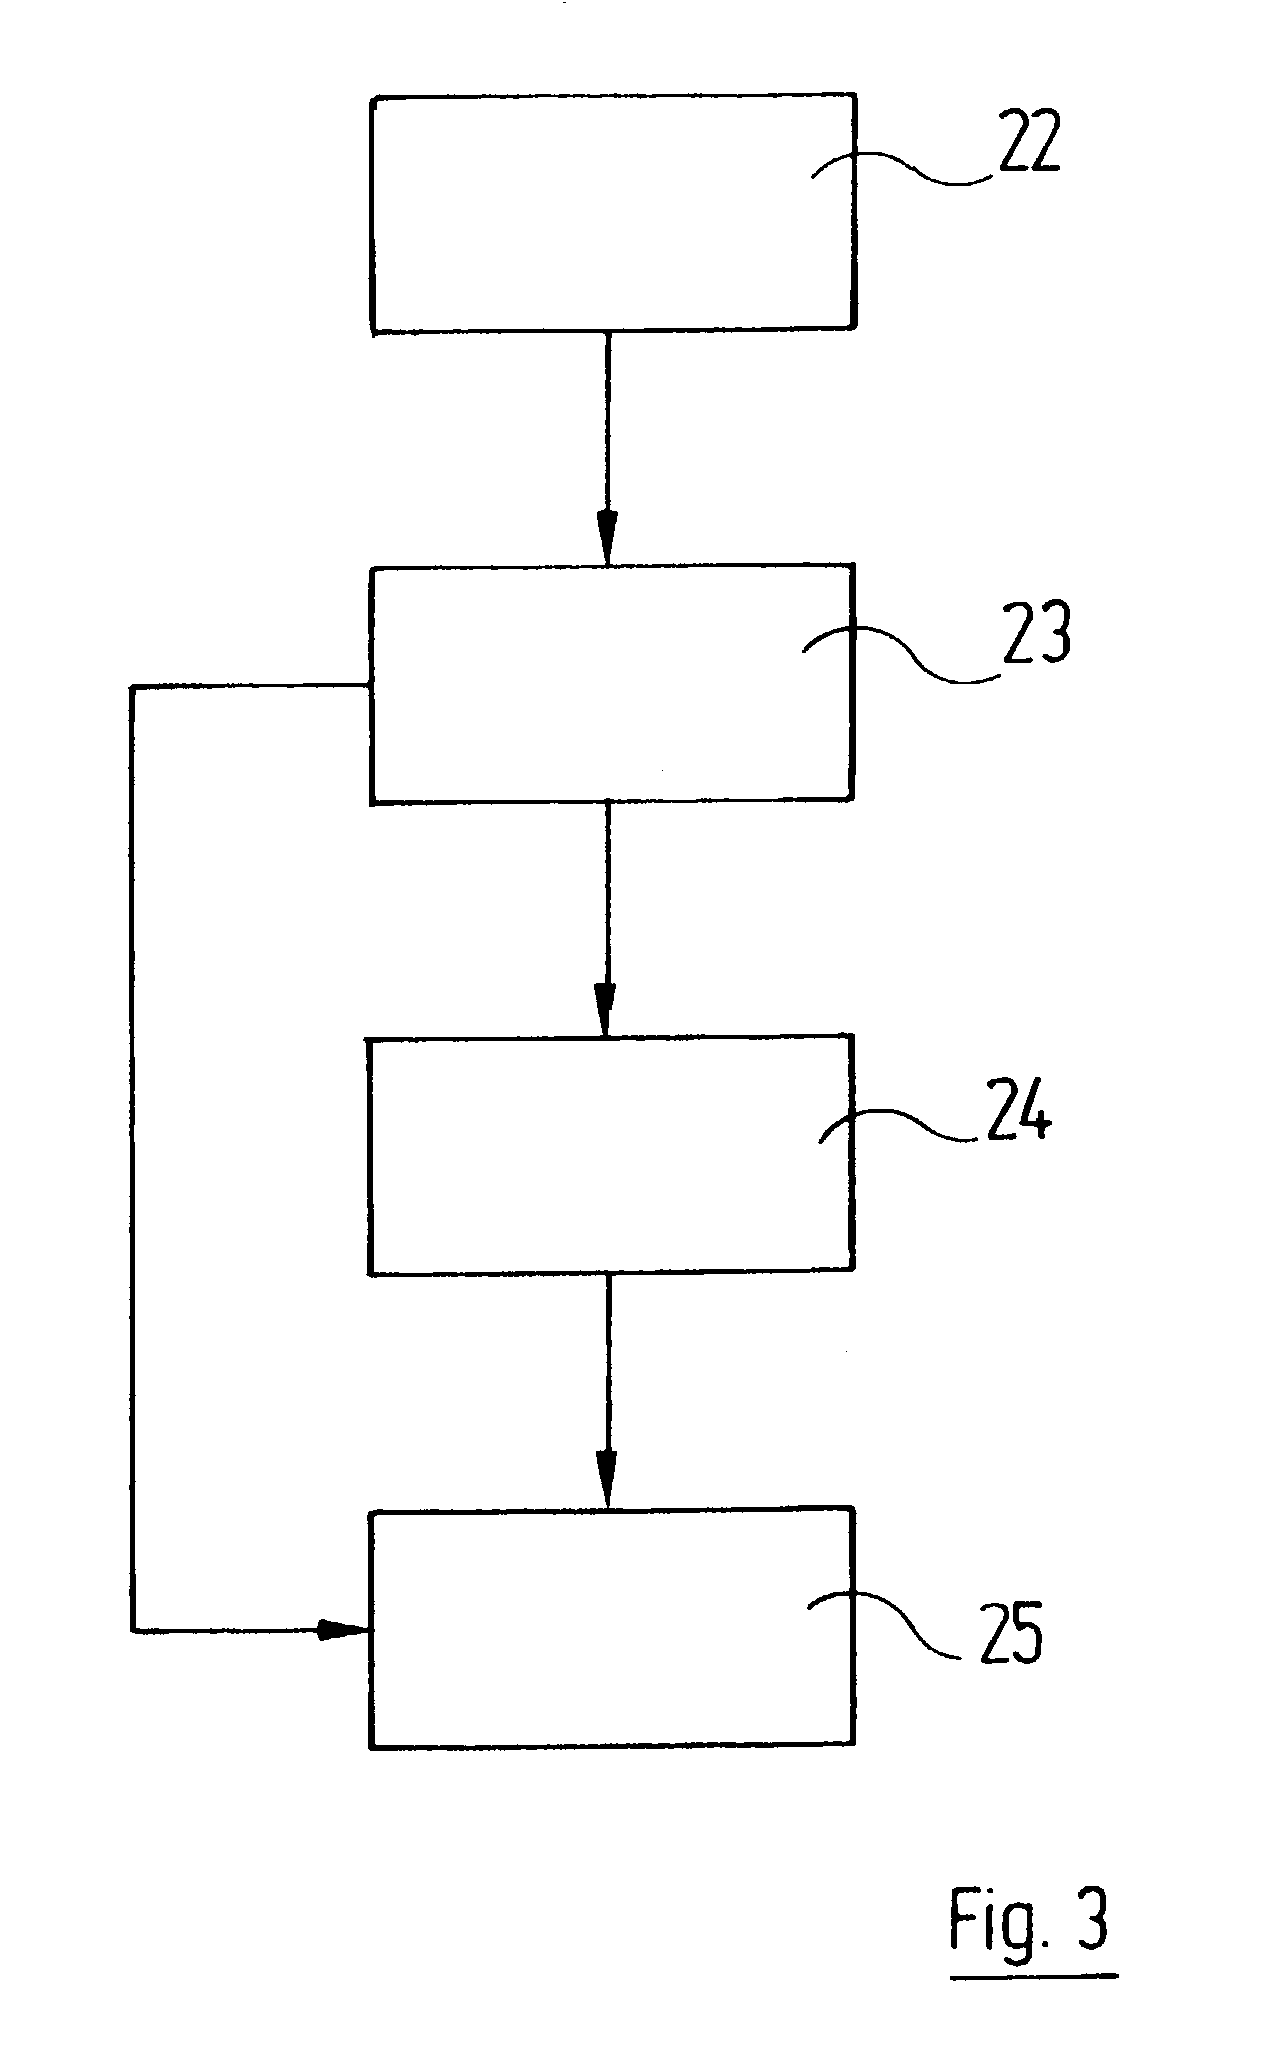 Interferometric measurement device for determining the birefringence in a transparent object